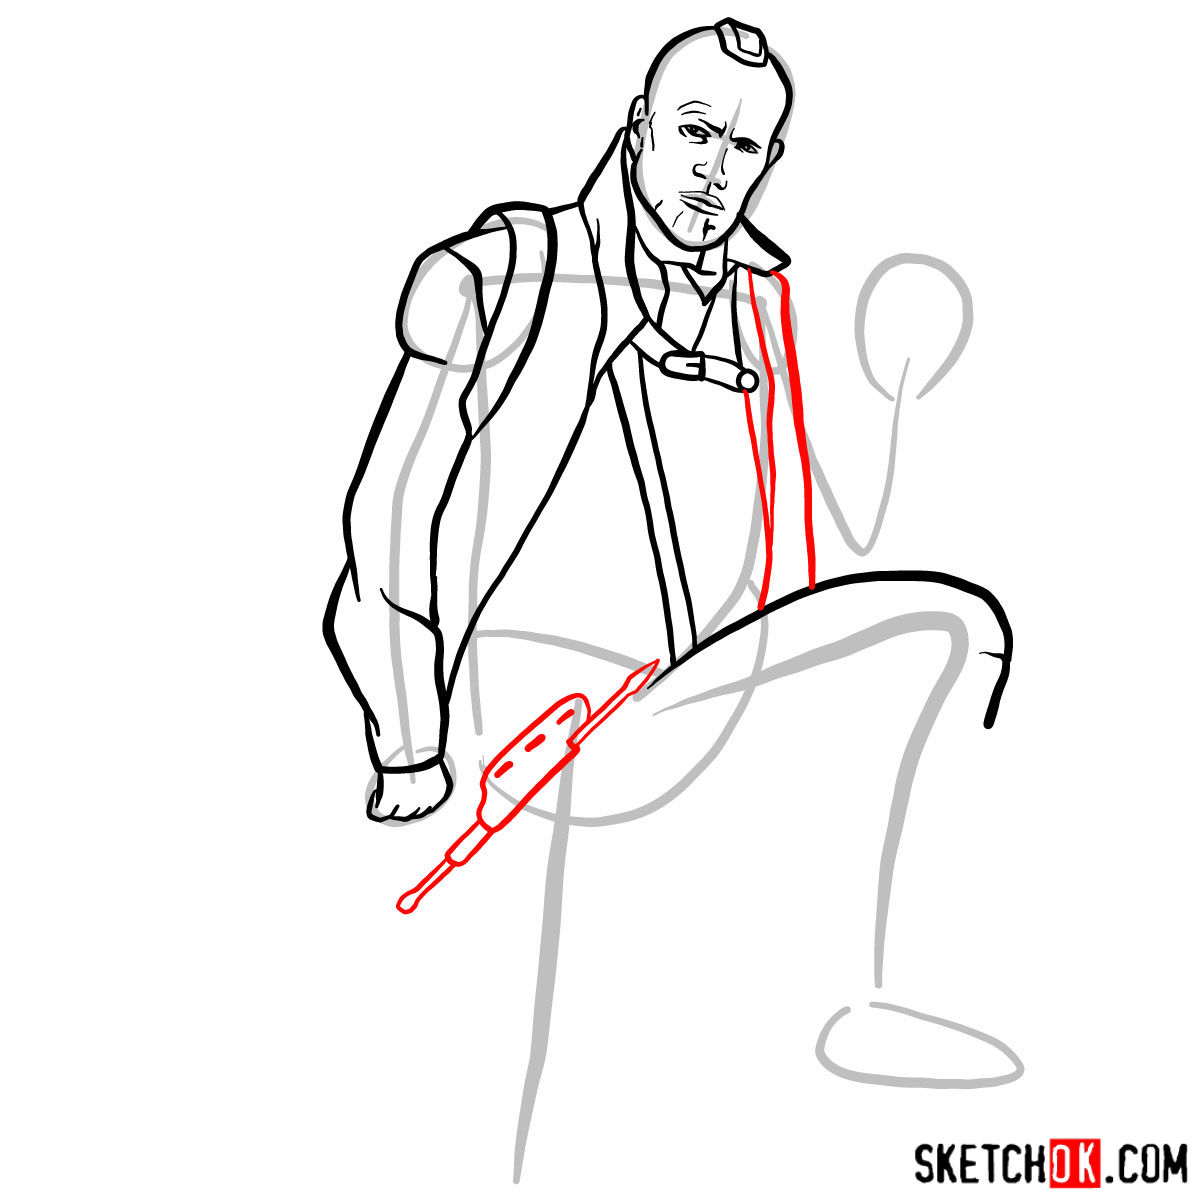 How to draw Yondu Udonta from Guardians of the Galaxy - step 08